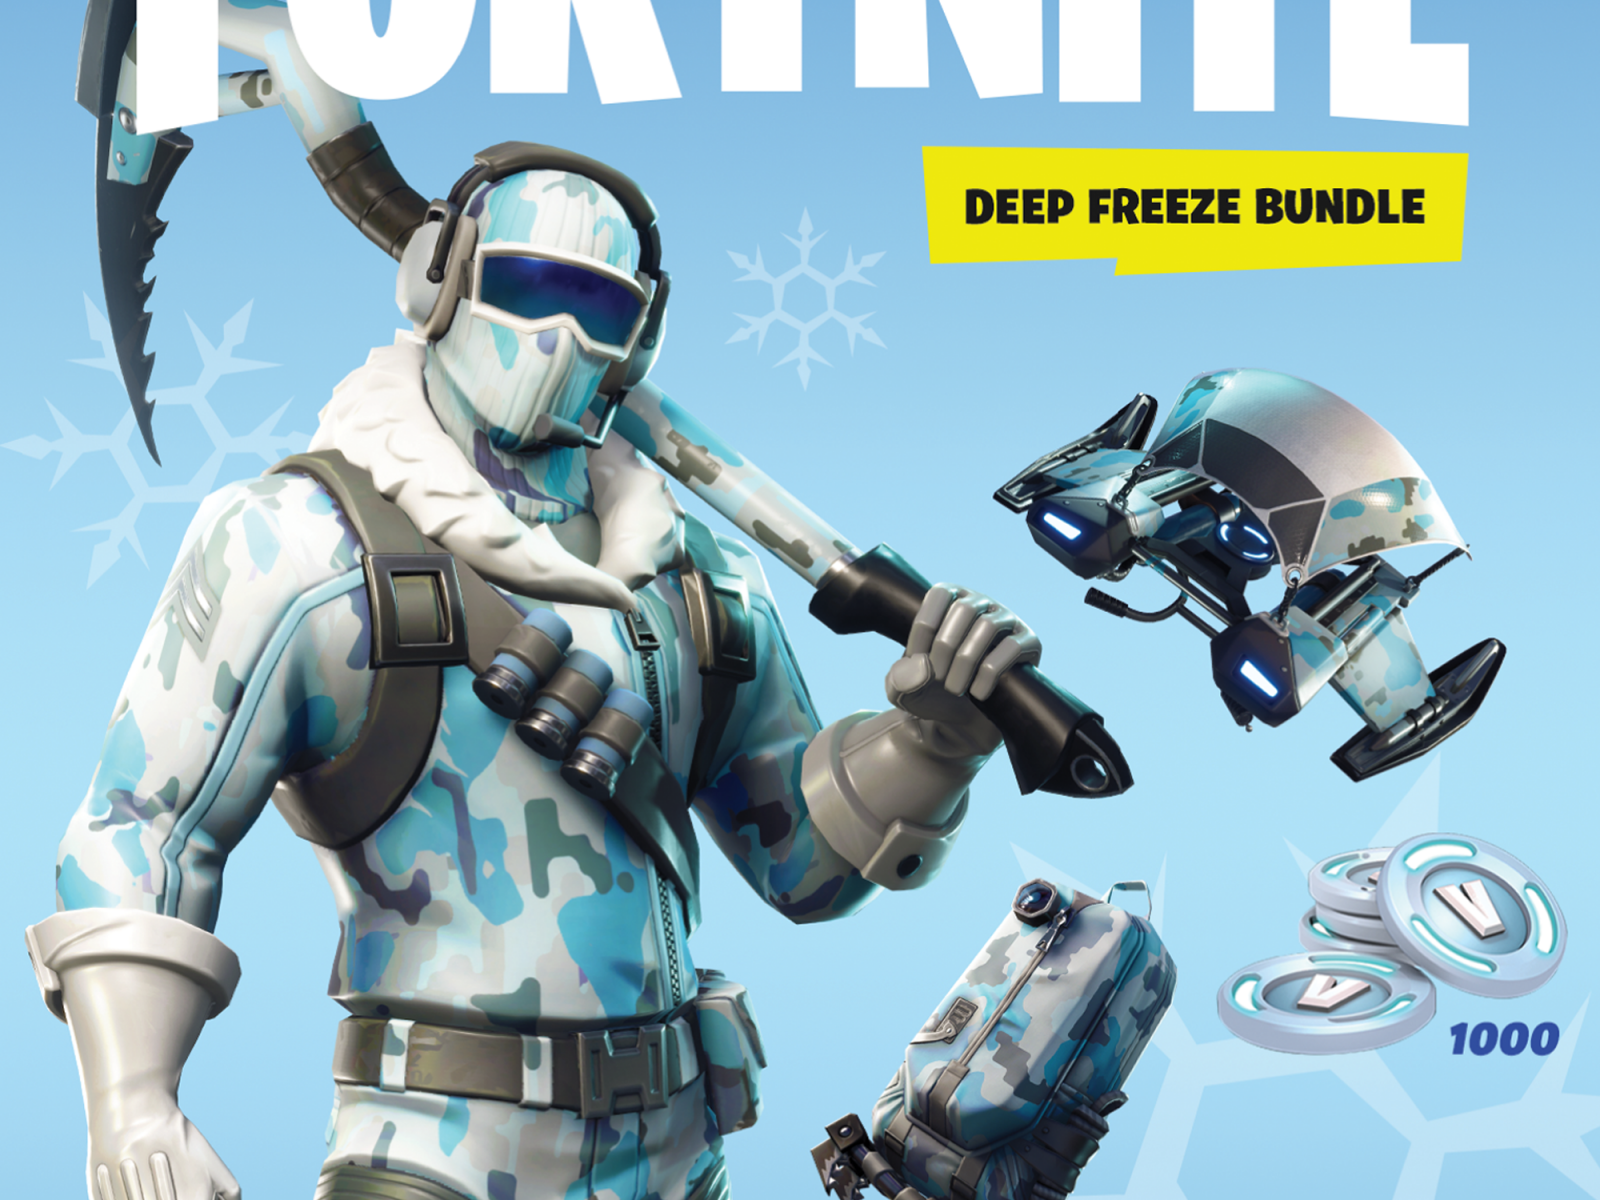 Fortnite Frostbite Skin Bundle Fortnite Deep Freeze Bundle Coming To Ps4 Xbox Switch With Frostbite Skin